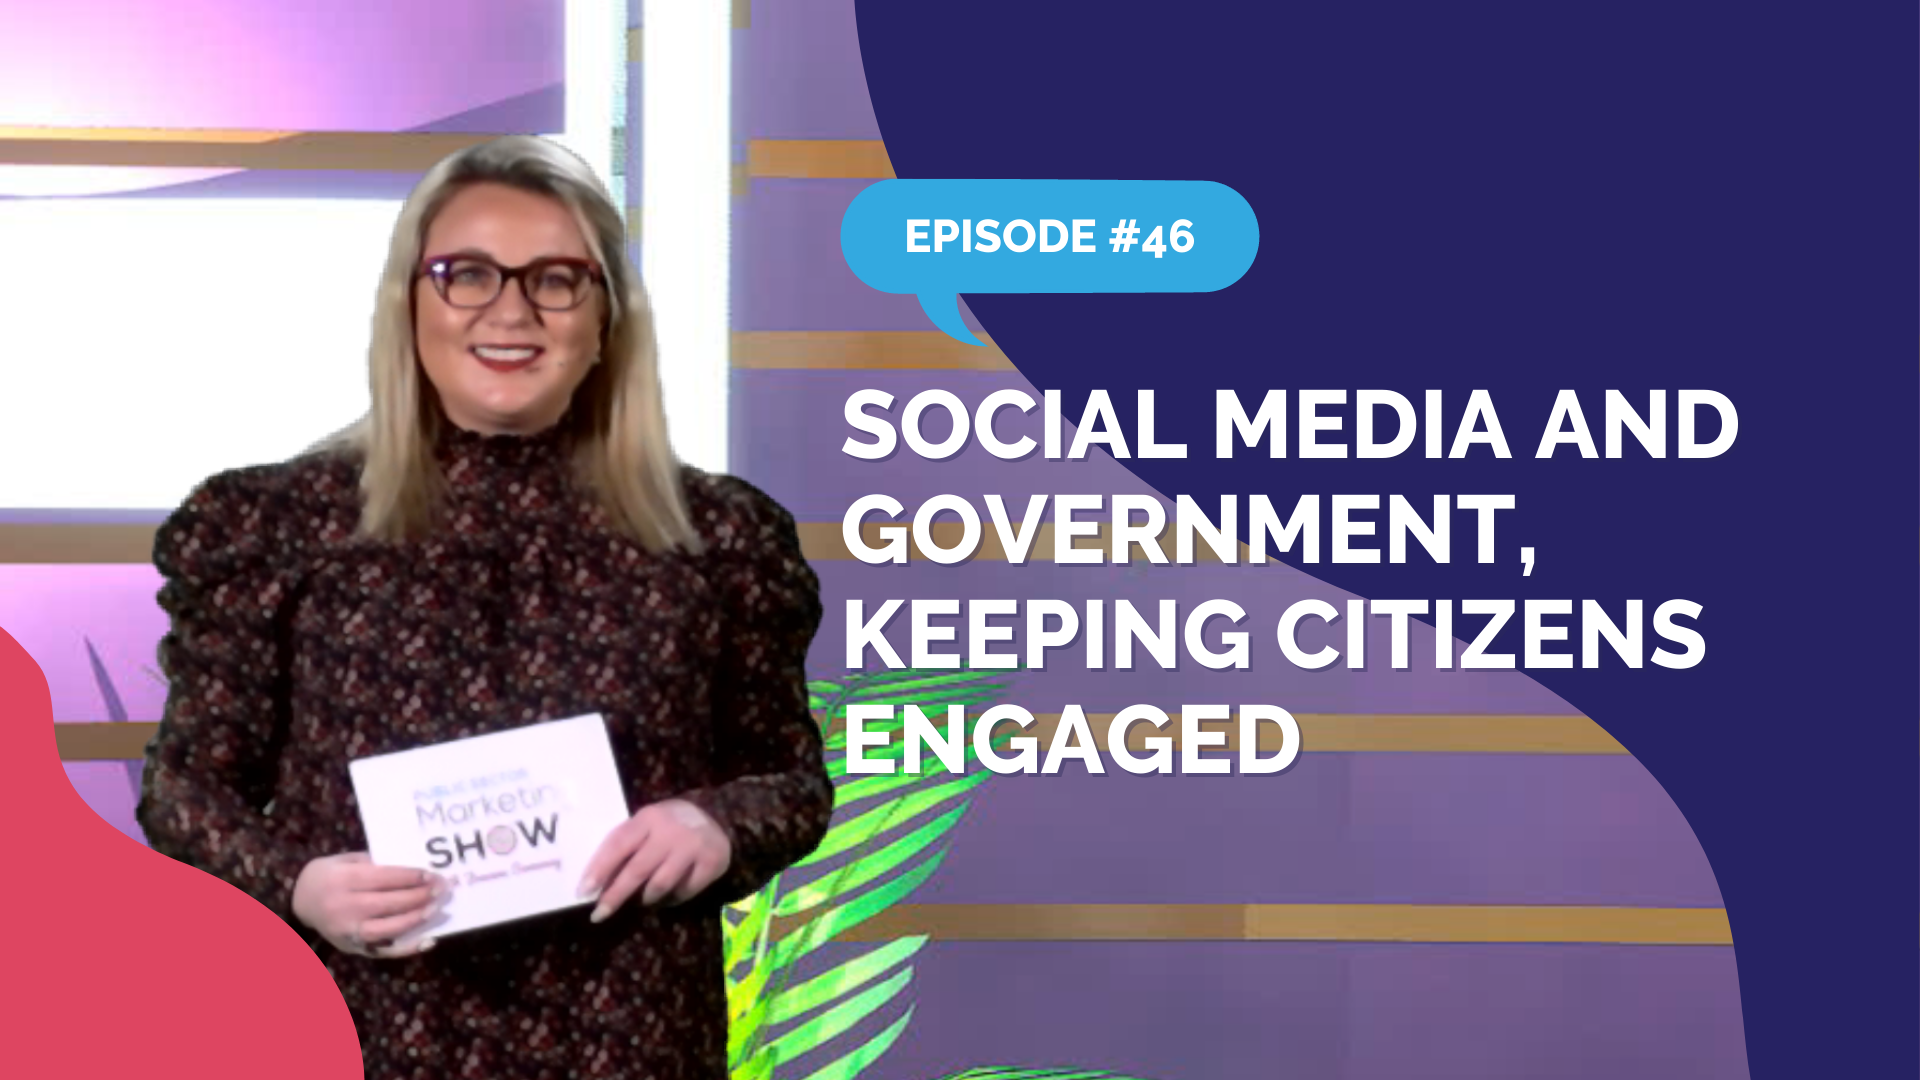 Episode 46 - Social Media and Government, Keeping Citizens Engaged